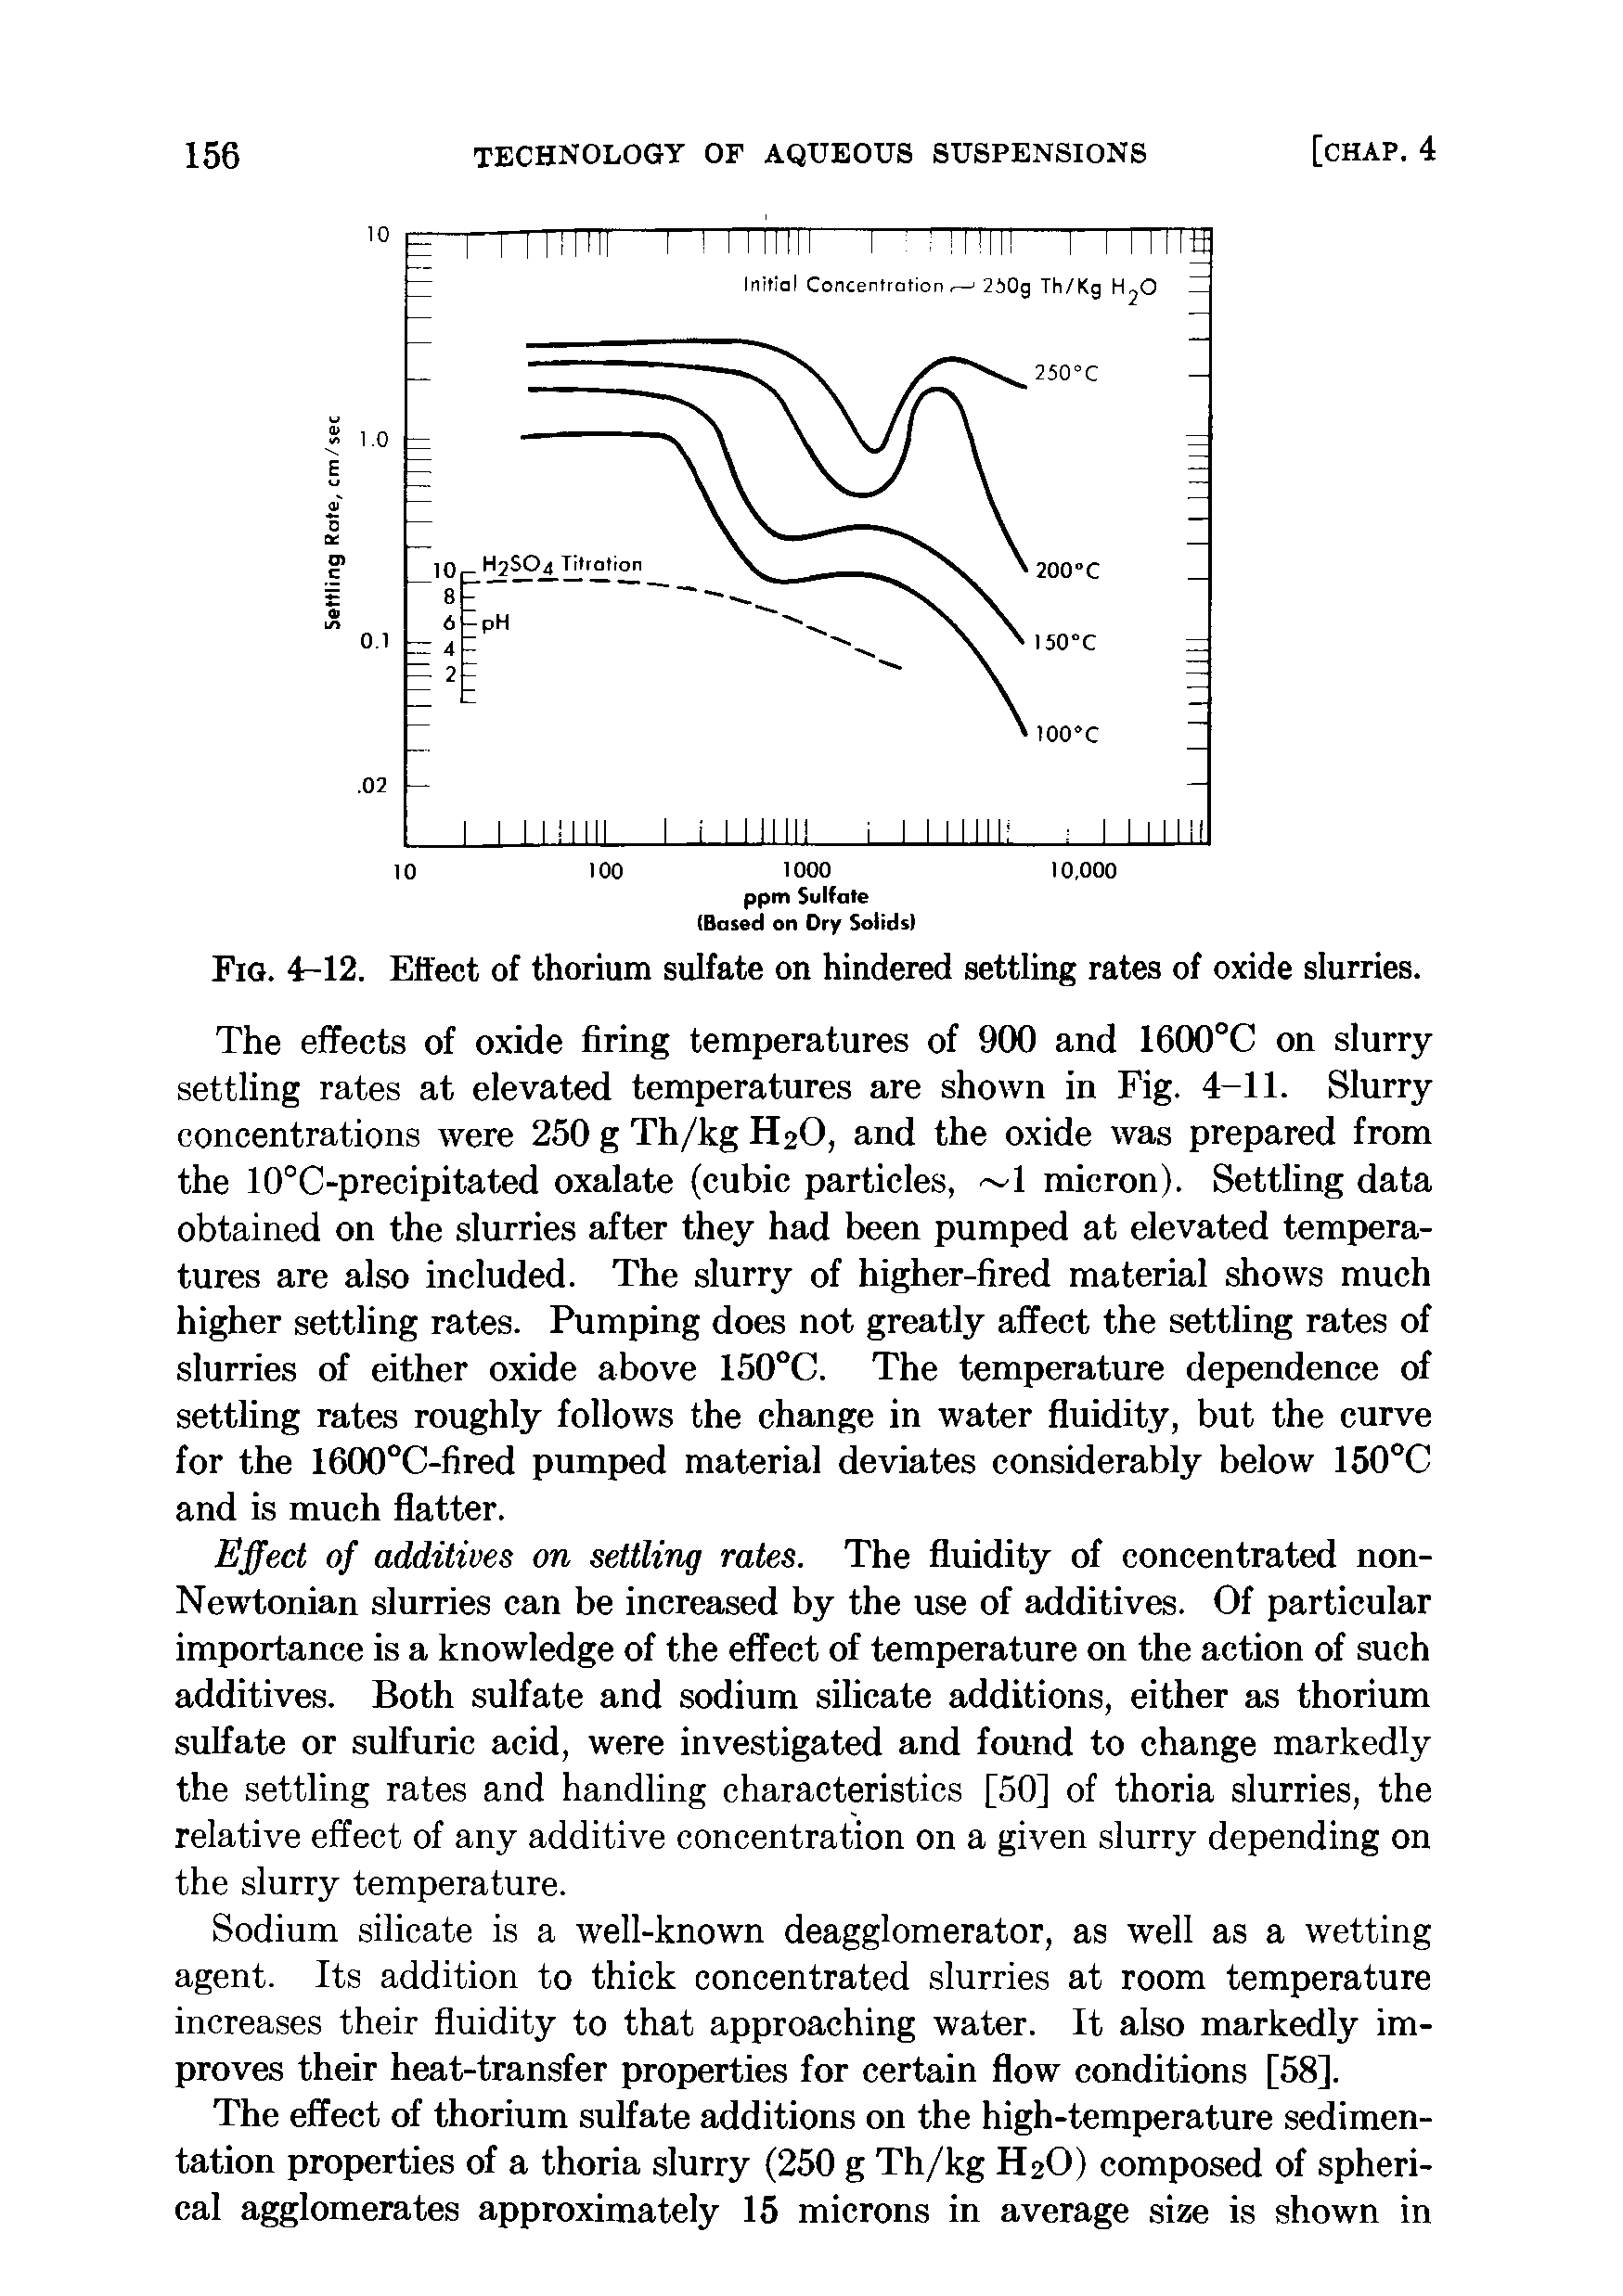 Fig. 4-12. Effect of thorium sulfate on hindered settling rates of oxide slurries.